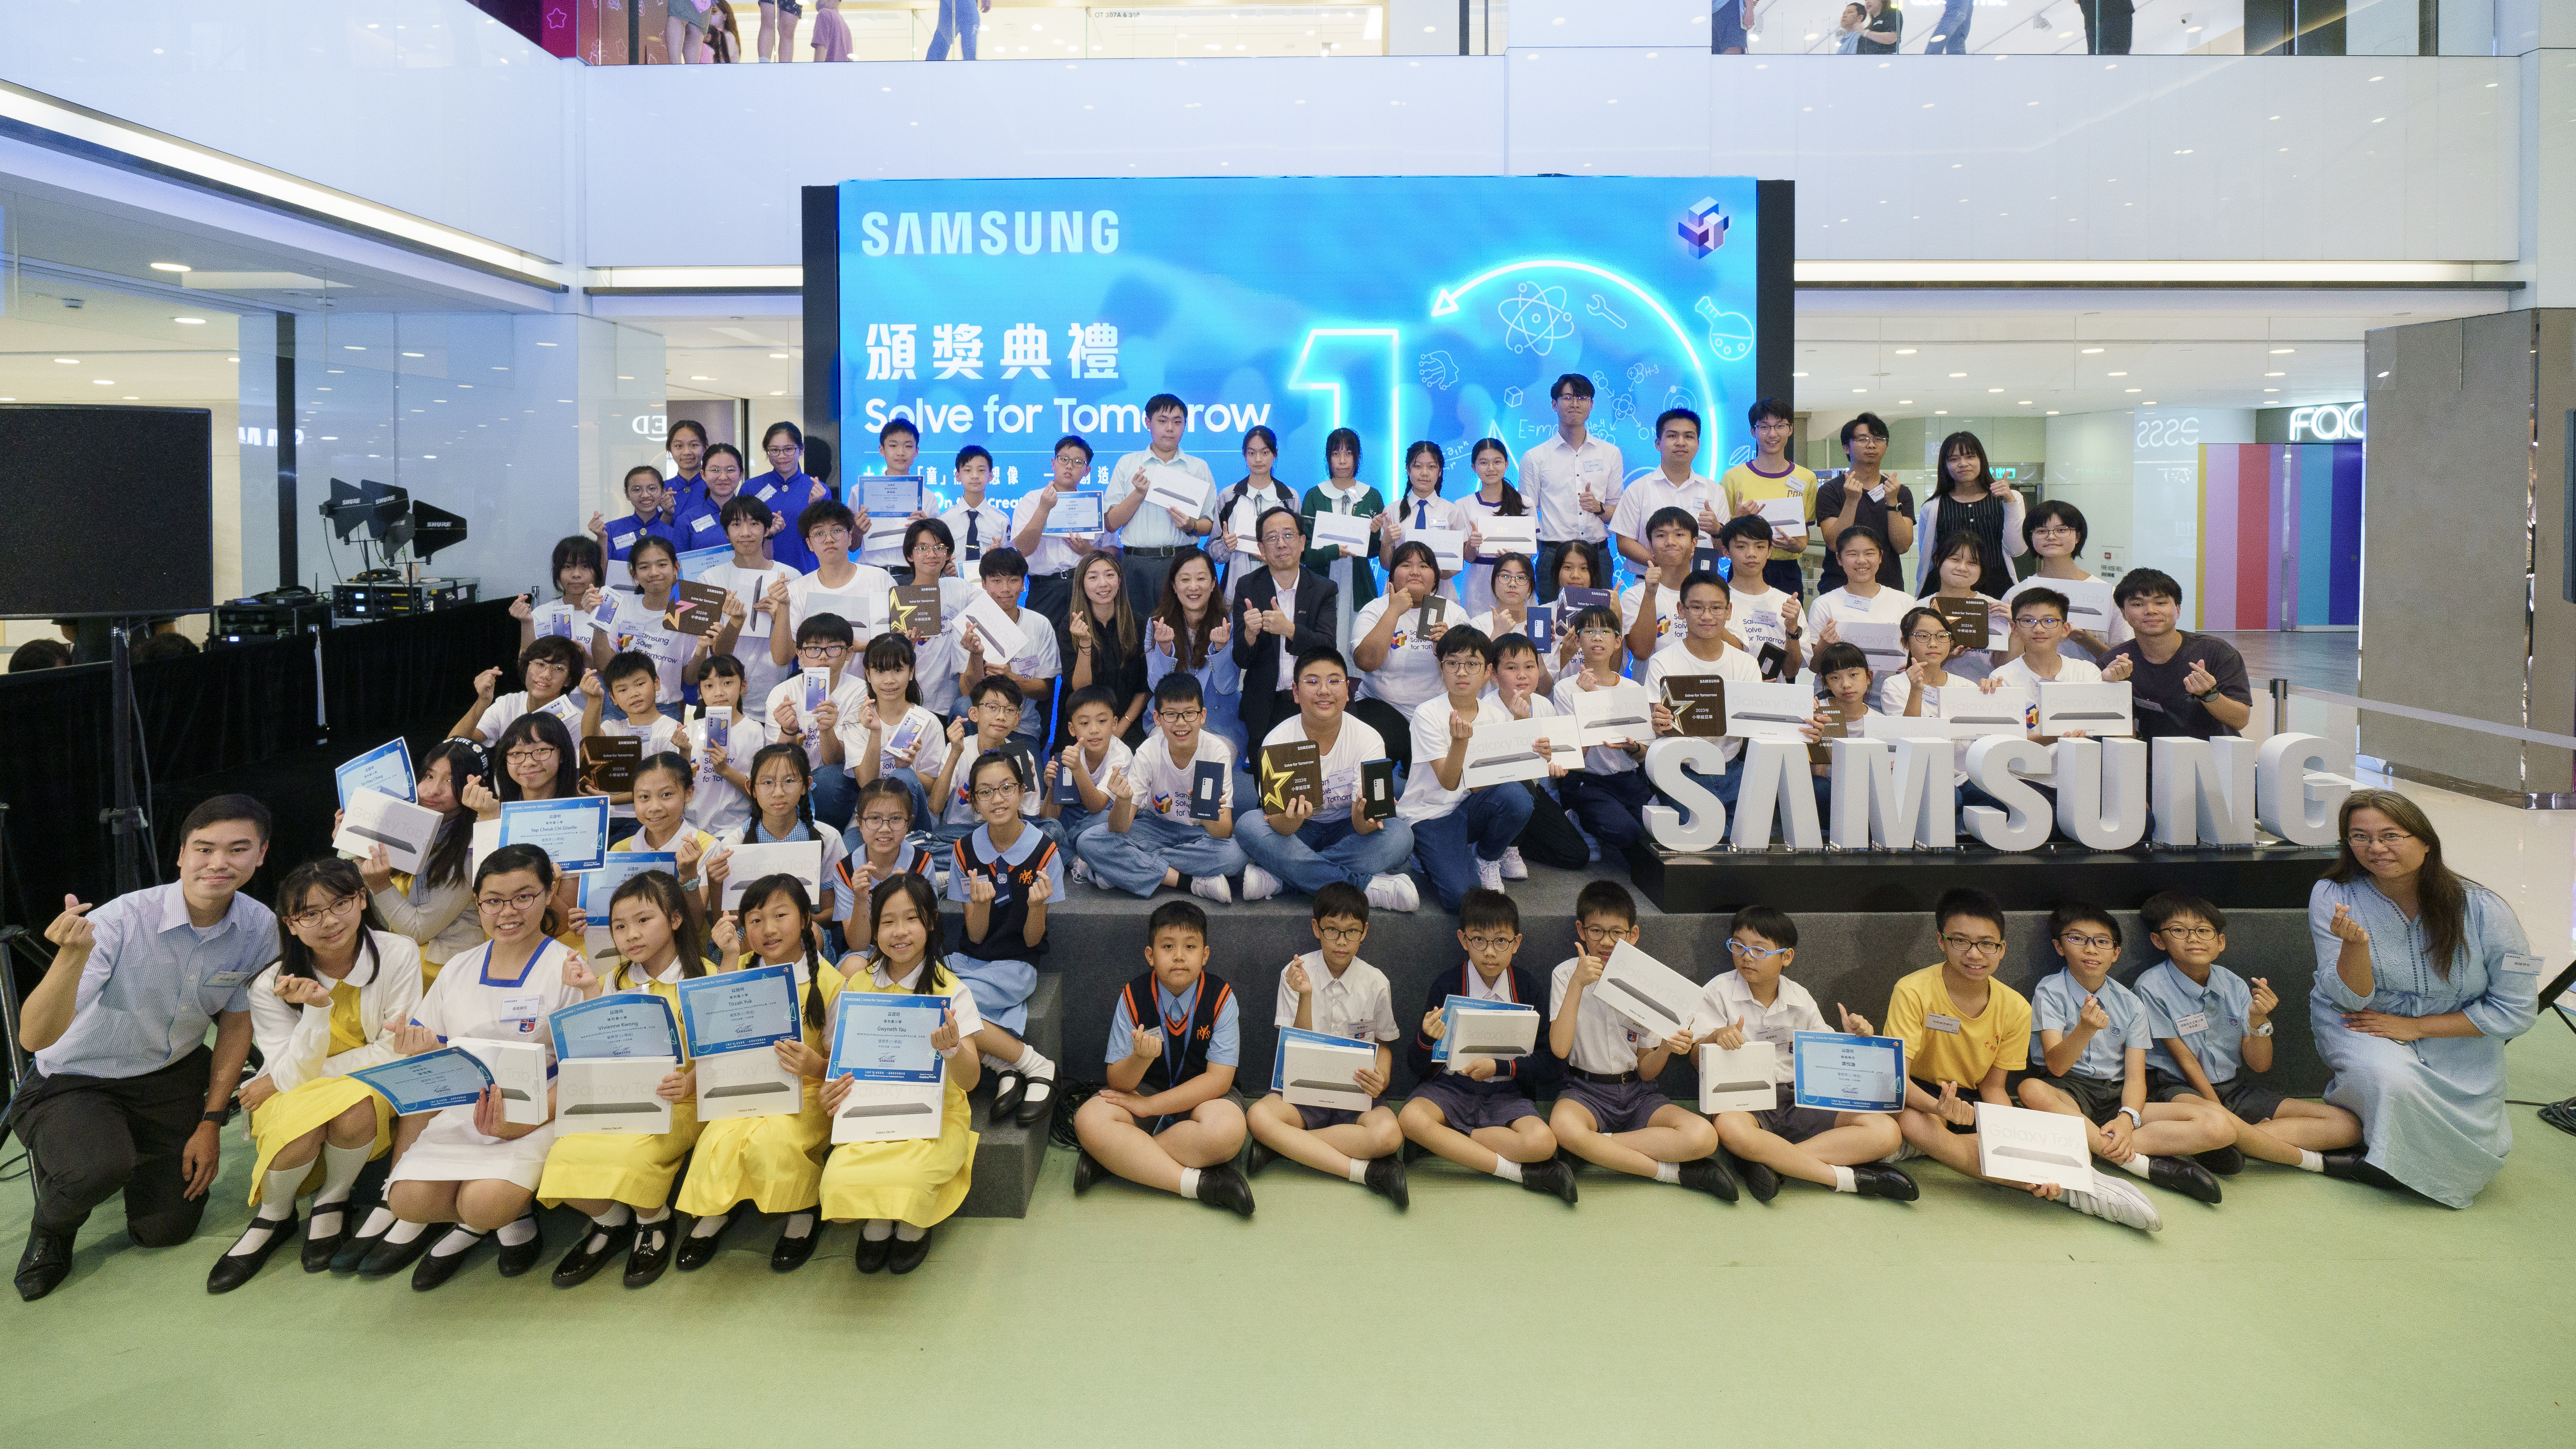 Samsung Solve for Tomorrow 2023 concludes after an 8-month journey, garnering remarkable participation from over 2,000 students representing nearly 400 primary and secondary schools who actively took part in a diverse range of activities